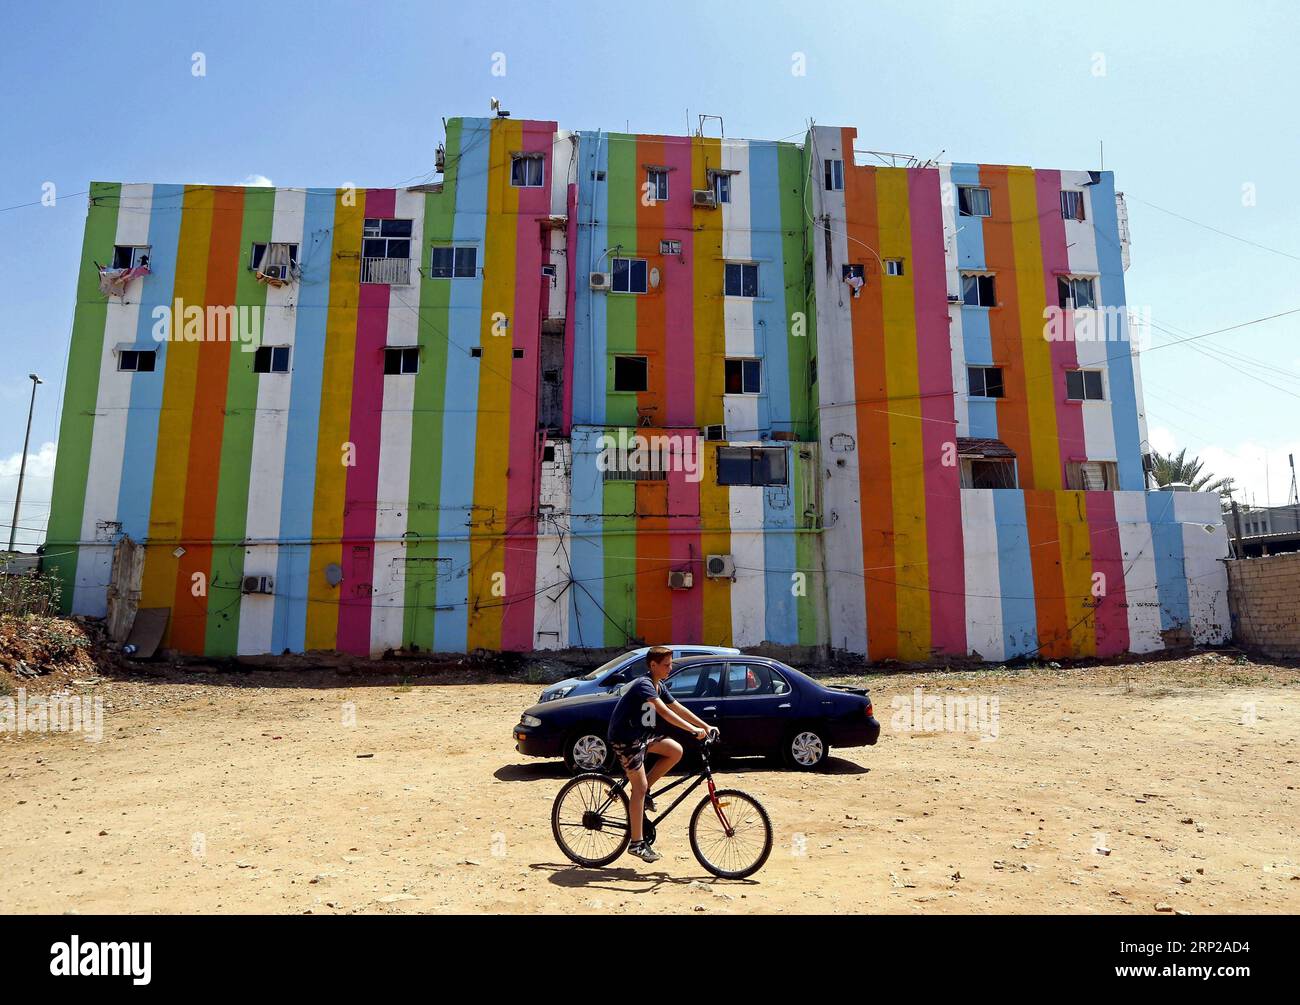 (180827) -- OUZAI, Aug. 27, 2018 -- A boy rides by buildings with colorful paintings in Ouzai, south of Beirut, Lebanon, on Aug. 26, 2018. ) (jmmn) LEBANON-OUZAI-BUILDINGS BilalxJawich PUBLICATIONxNOTxINxCHN Stock Photo